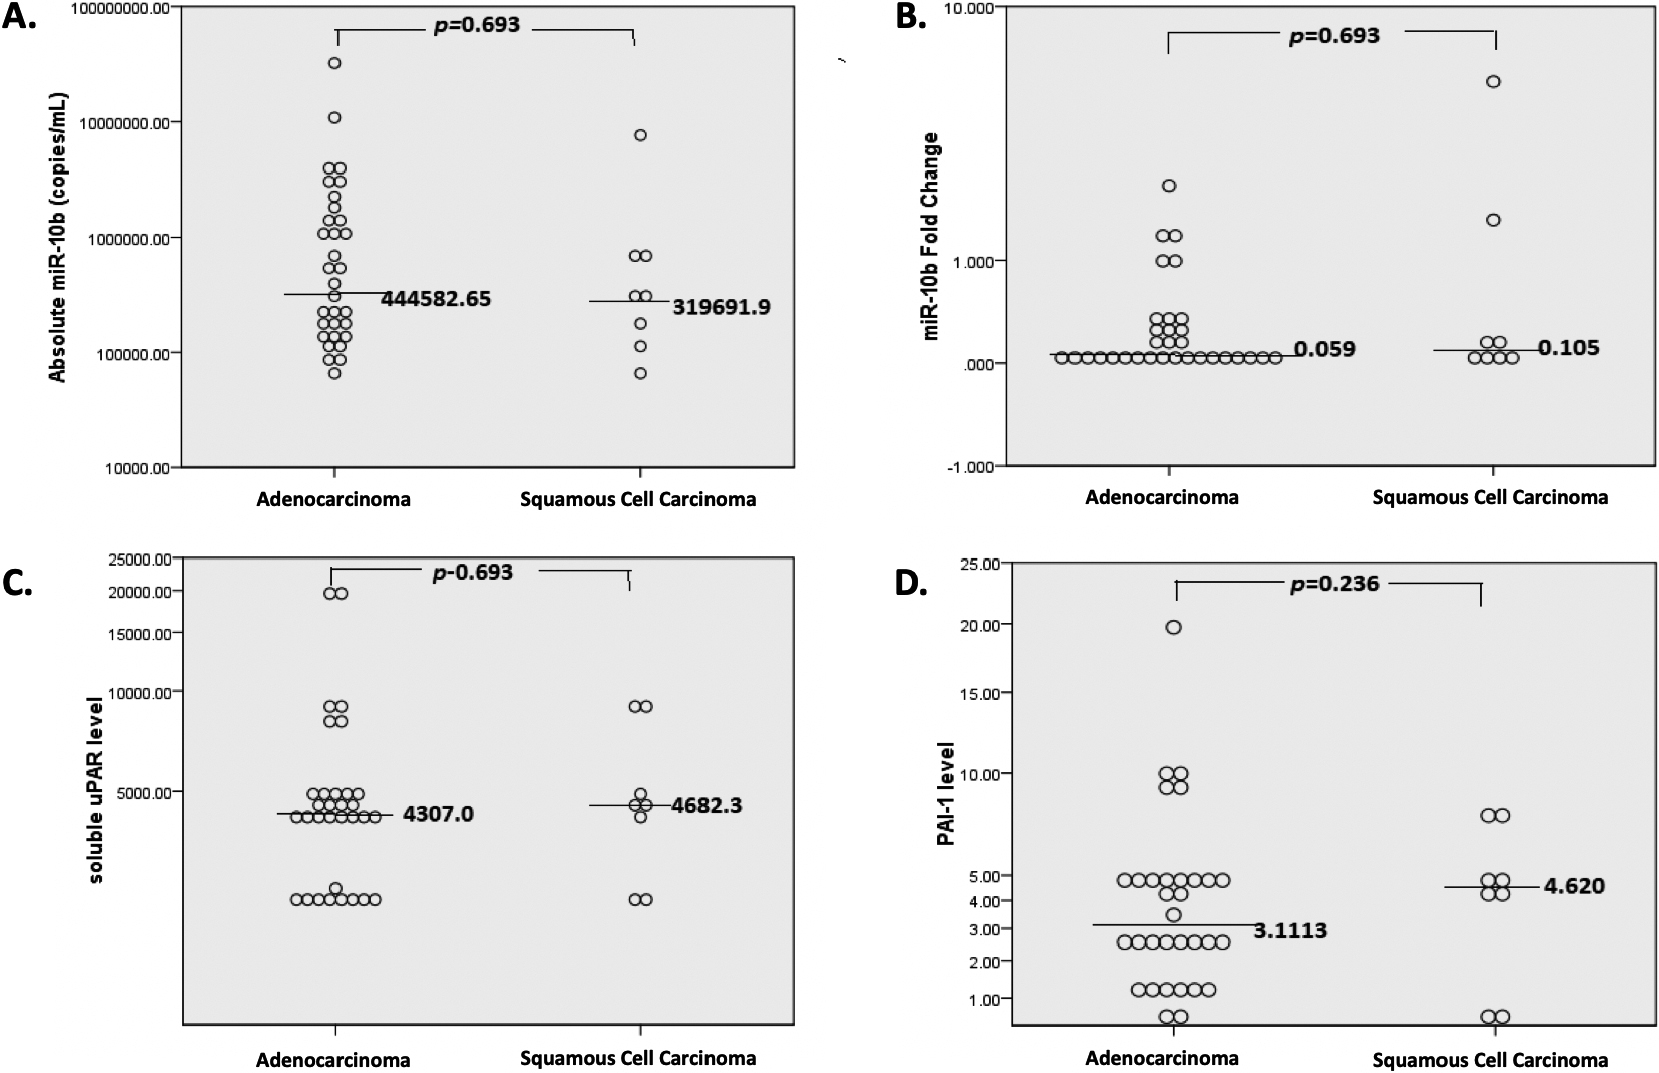 Scatter plots of association between miR-10b, SuPAR, and PA-I with histopathology characteristics. (A) Scatter plot for Absolute miR-10b showing a median of 444,582.65 in adenocarcinoma vs 319,691.9 in SCC (P= 0.693). (B) Scatter plot for miR-10b FC showing a median of 0.059 in adenocarcinoma vs 0.105 in SCC (P= 0.693). (C) Scatter plot for suPAR showing a median 4,307.0 in adenocarcinoma vs 4,682.3 in SCC (P= 0.693). (D) Scatter plot for PAI-1 showing a median of 3.1113 in adenocarcinoma vs 4.620 in SCC (P= 0.236).